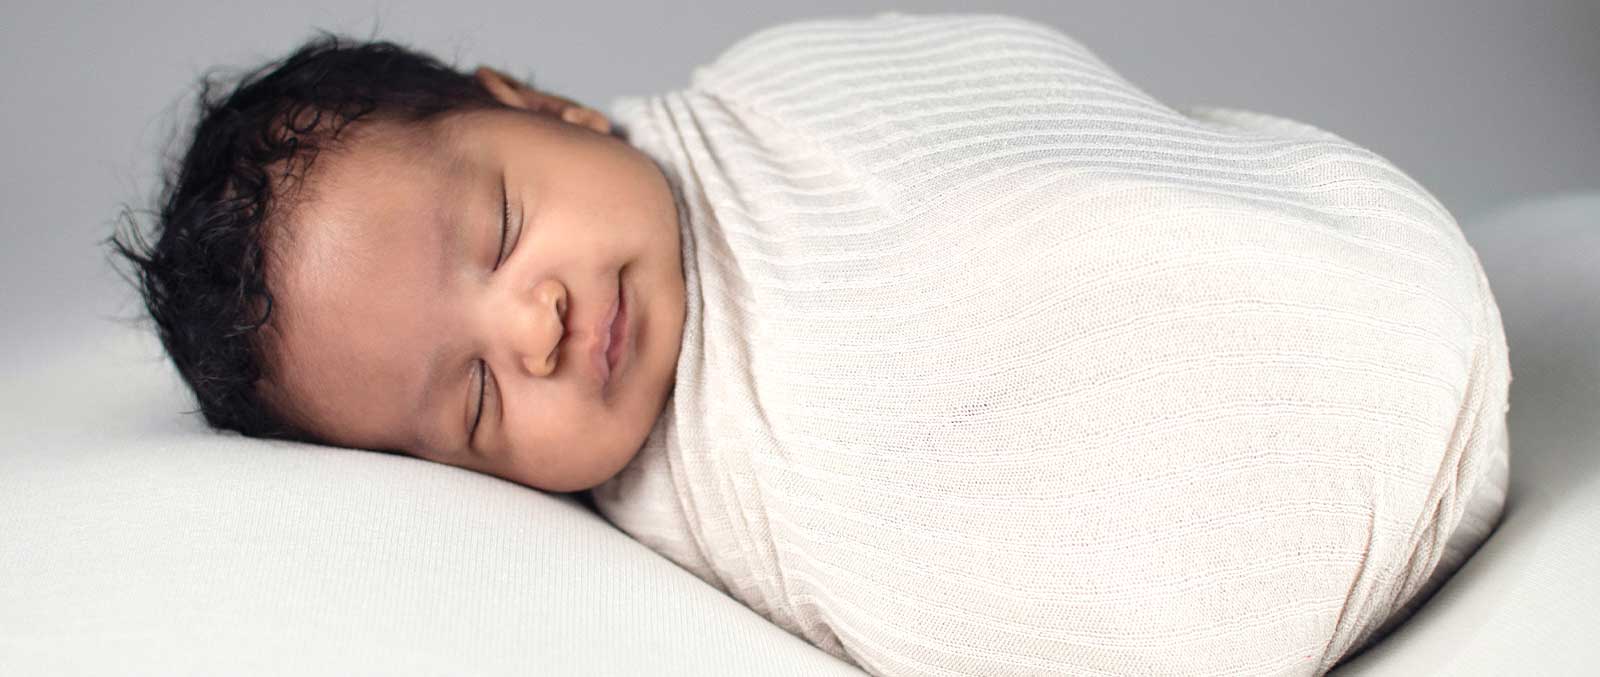 How to swaddle a baby Baby in a tightly wrapped swaddle 